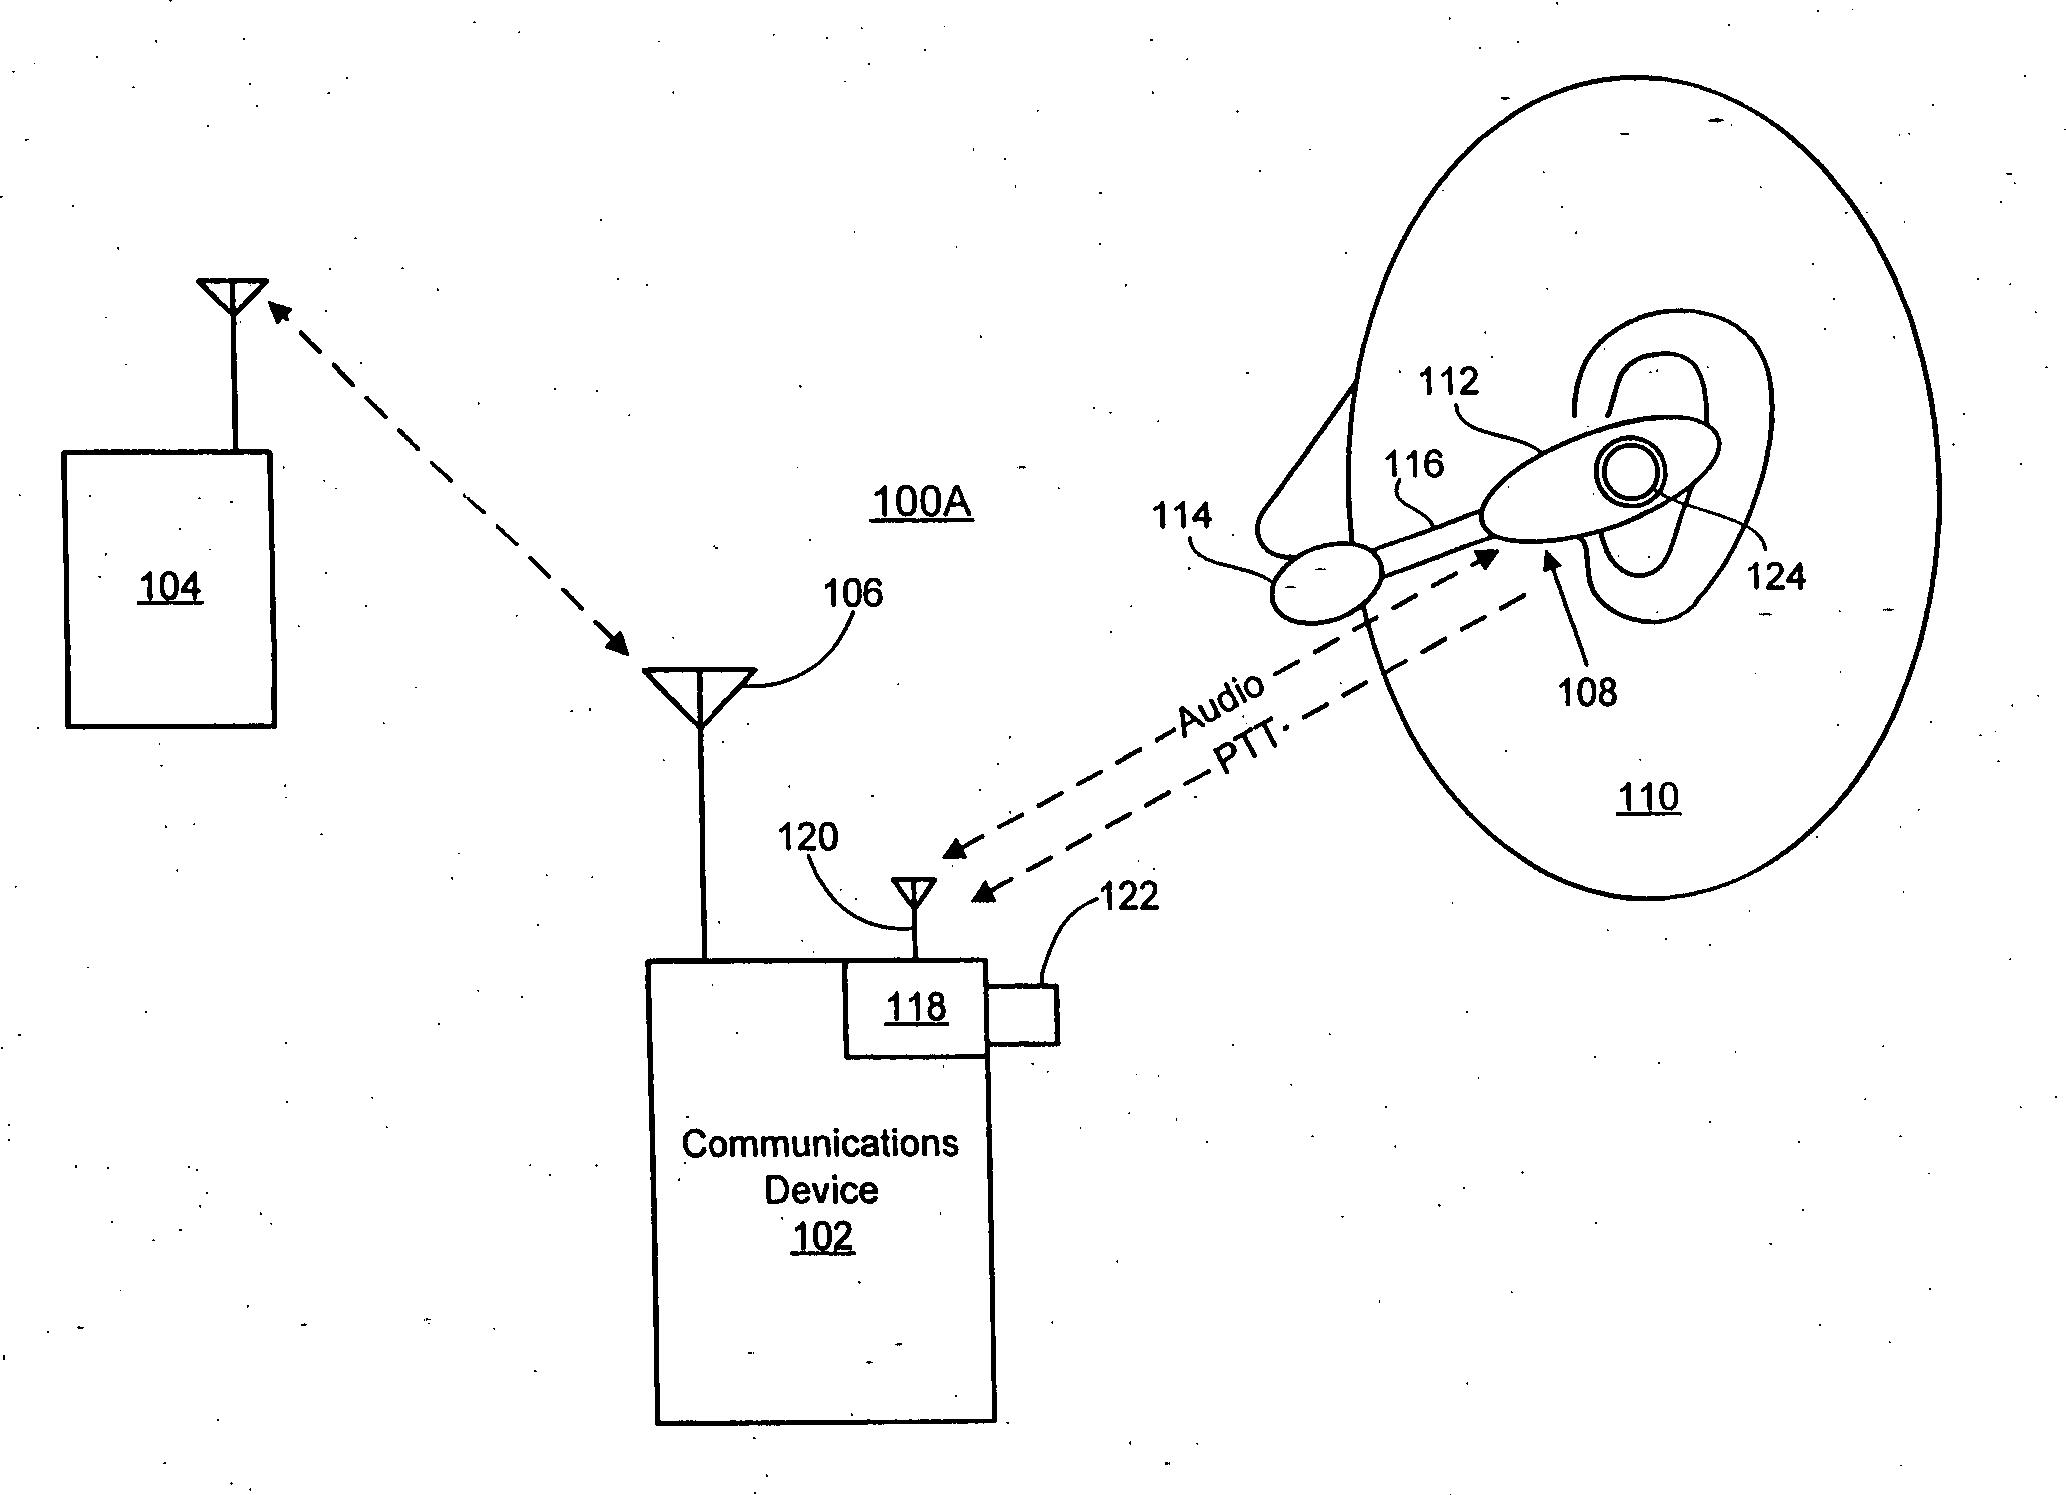 Wireless headset for communications device